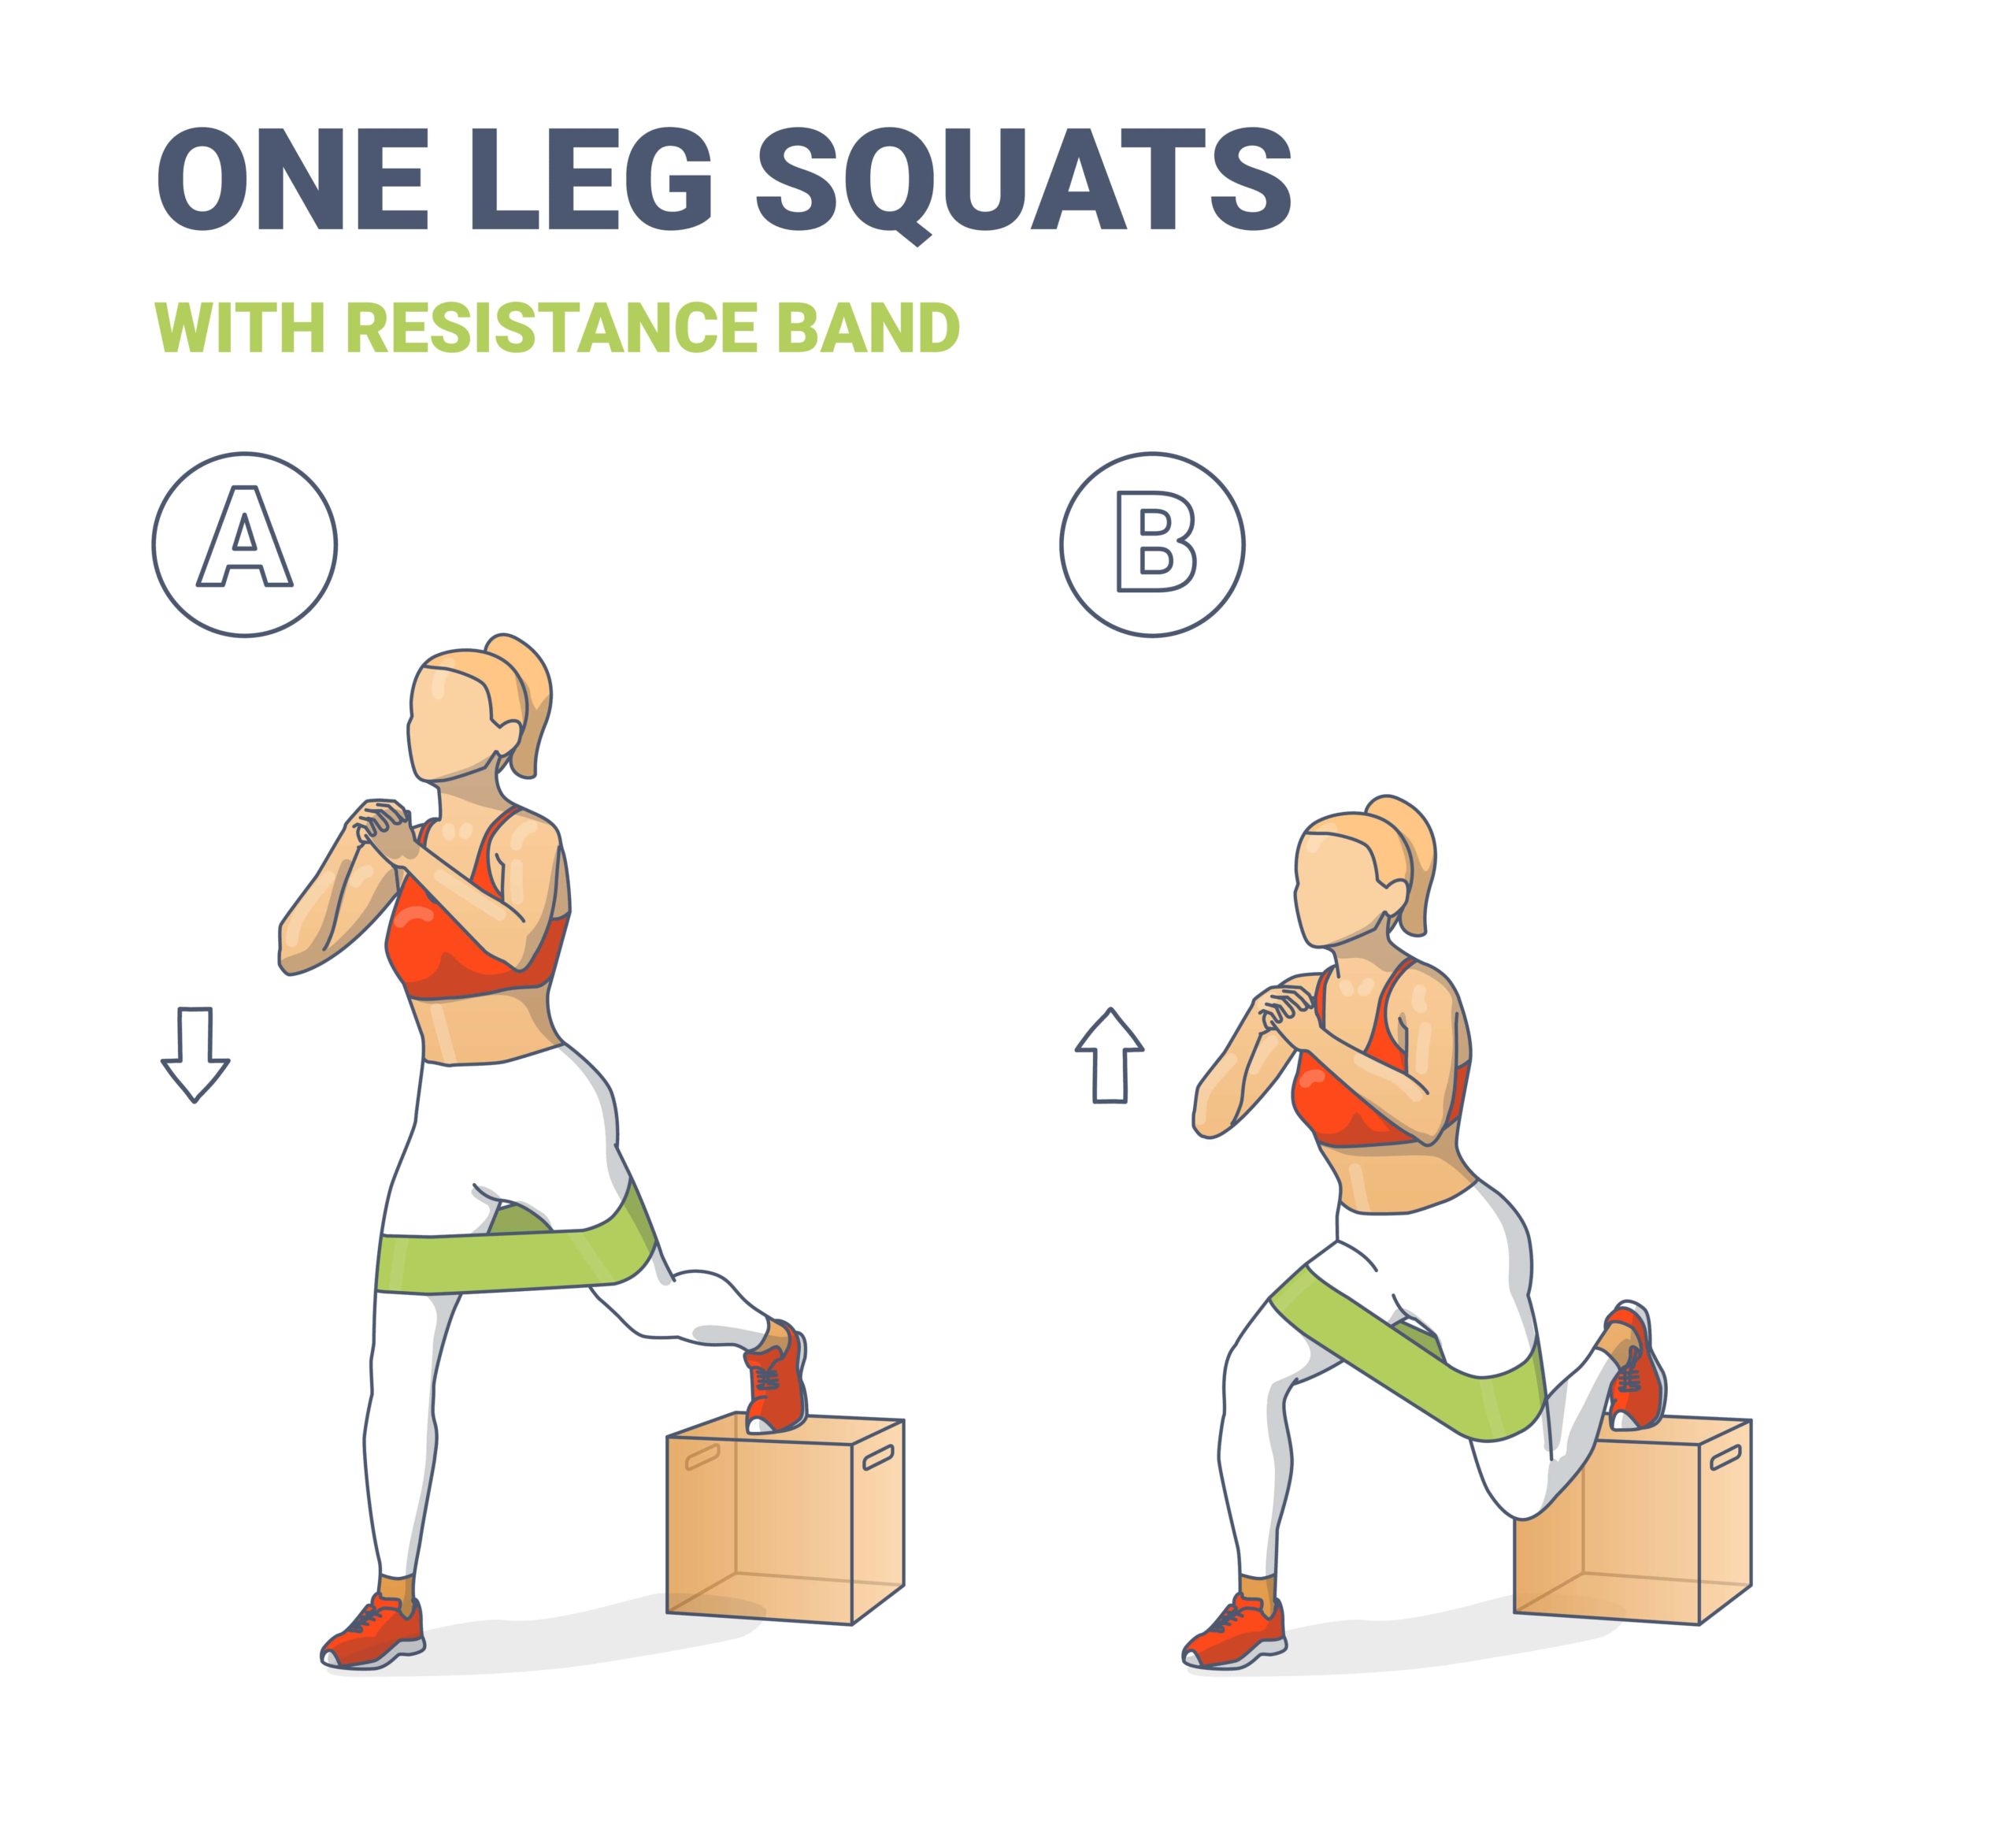 Exercice n°2 : One Leg Squats